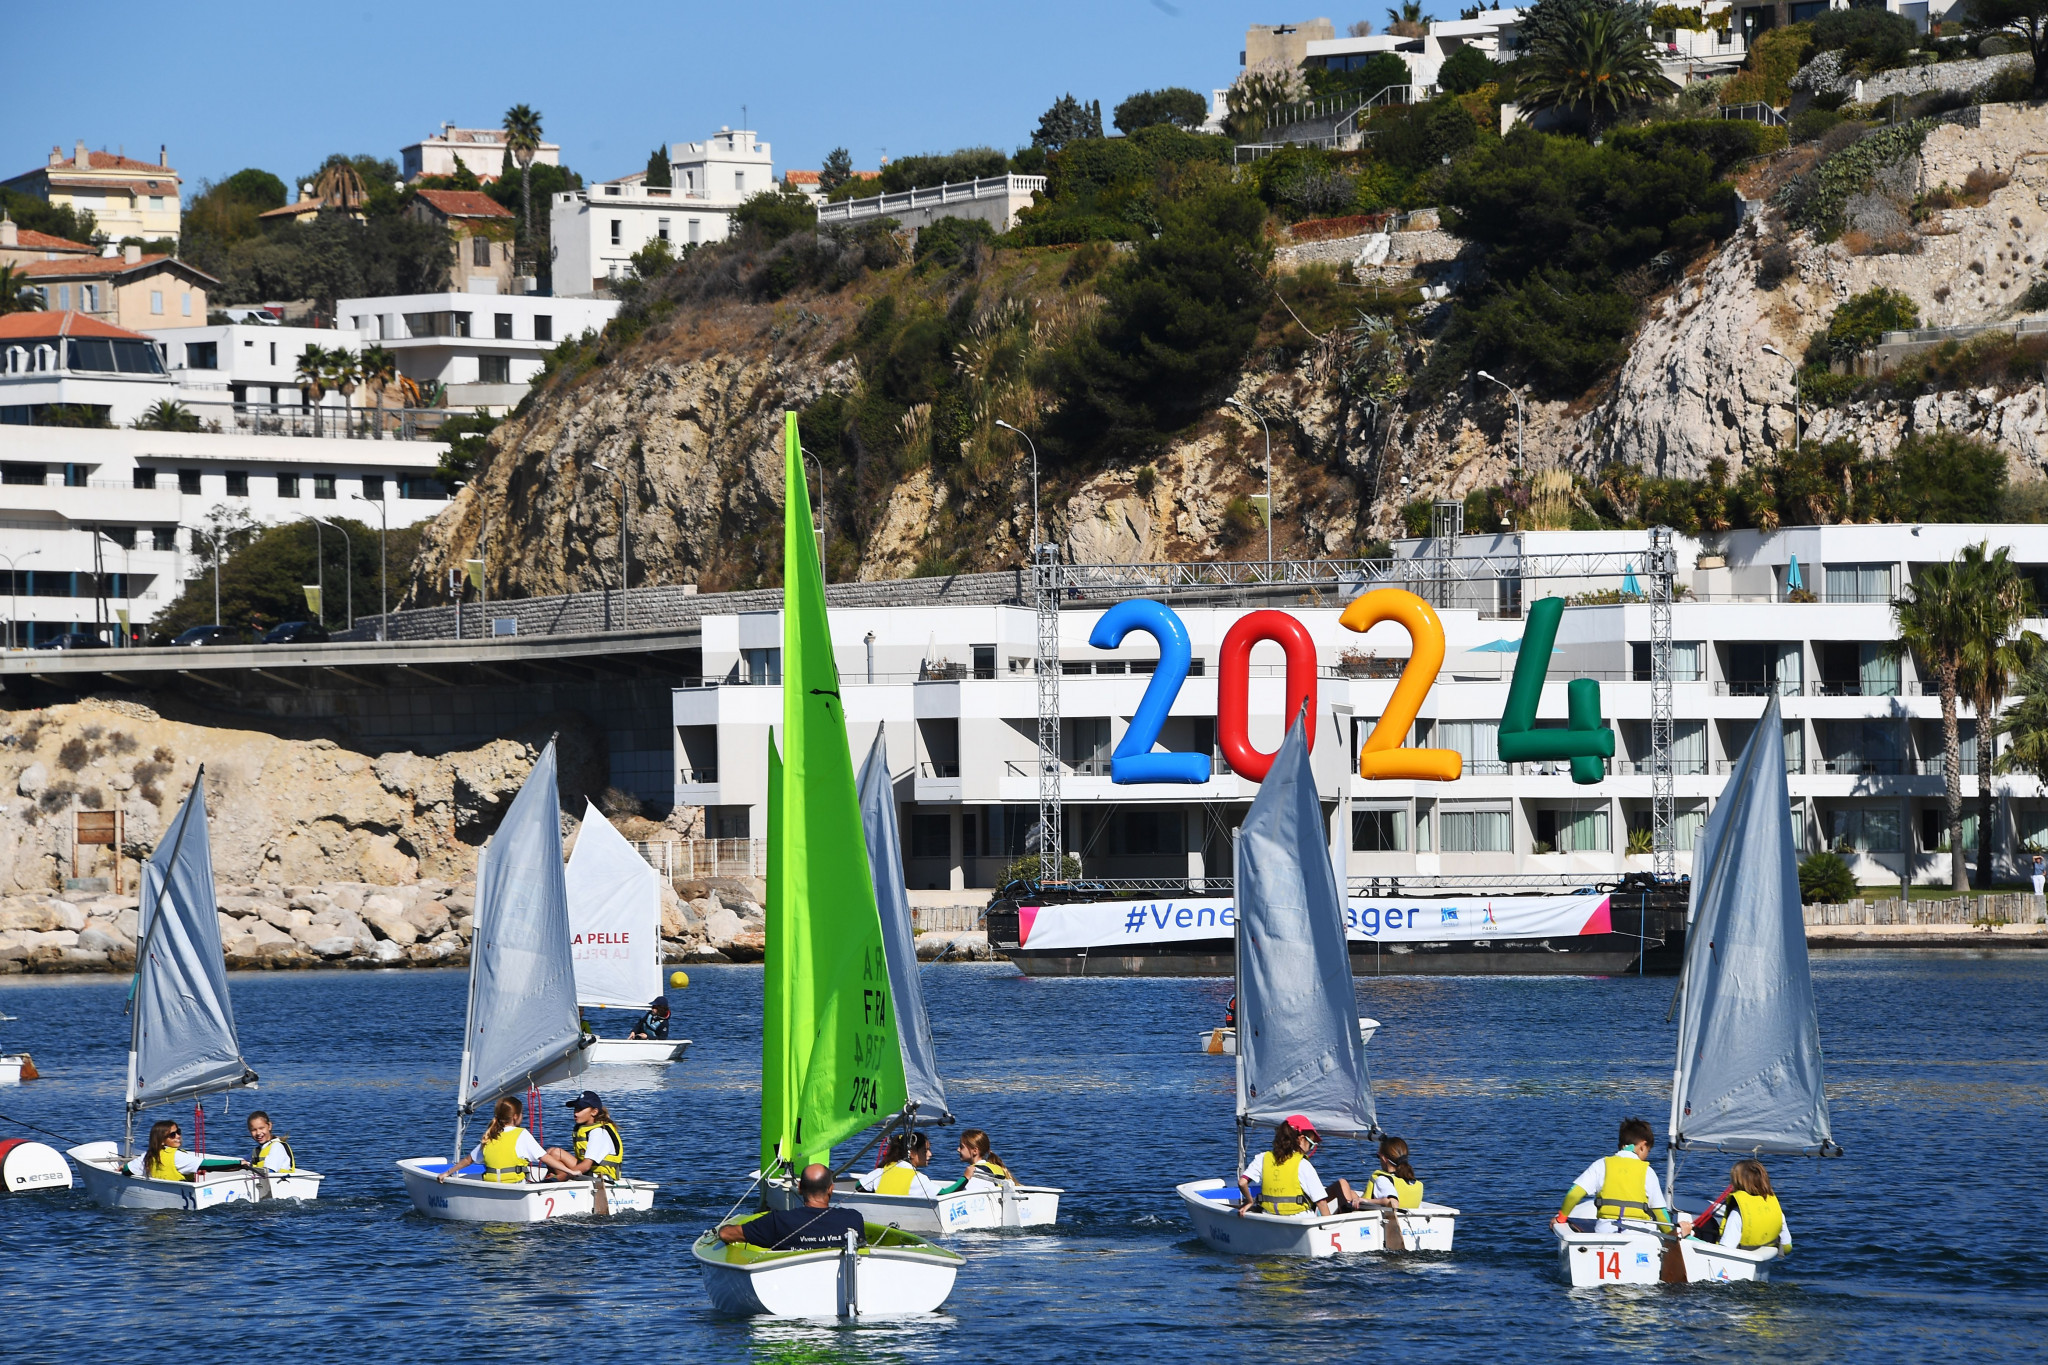 Marseille set sights on first city to hold Paris 2024 Olympic